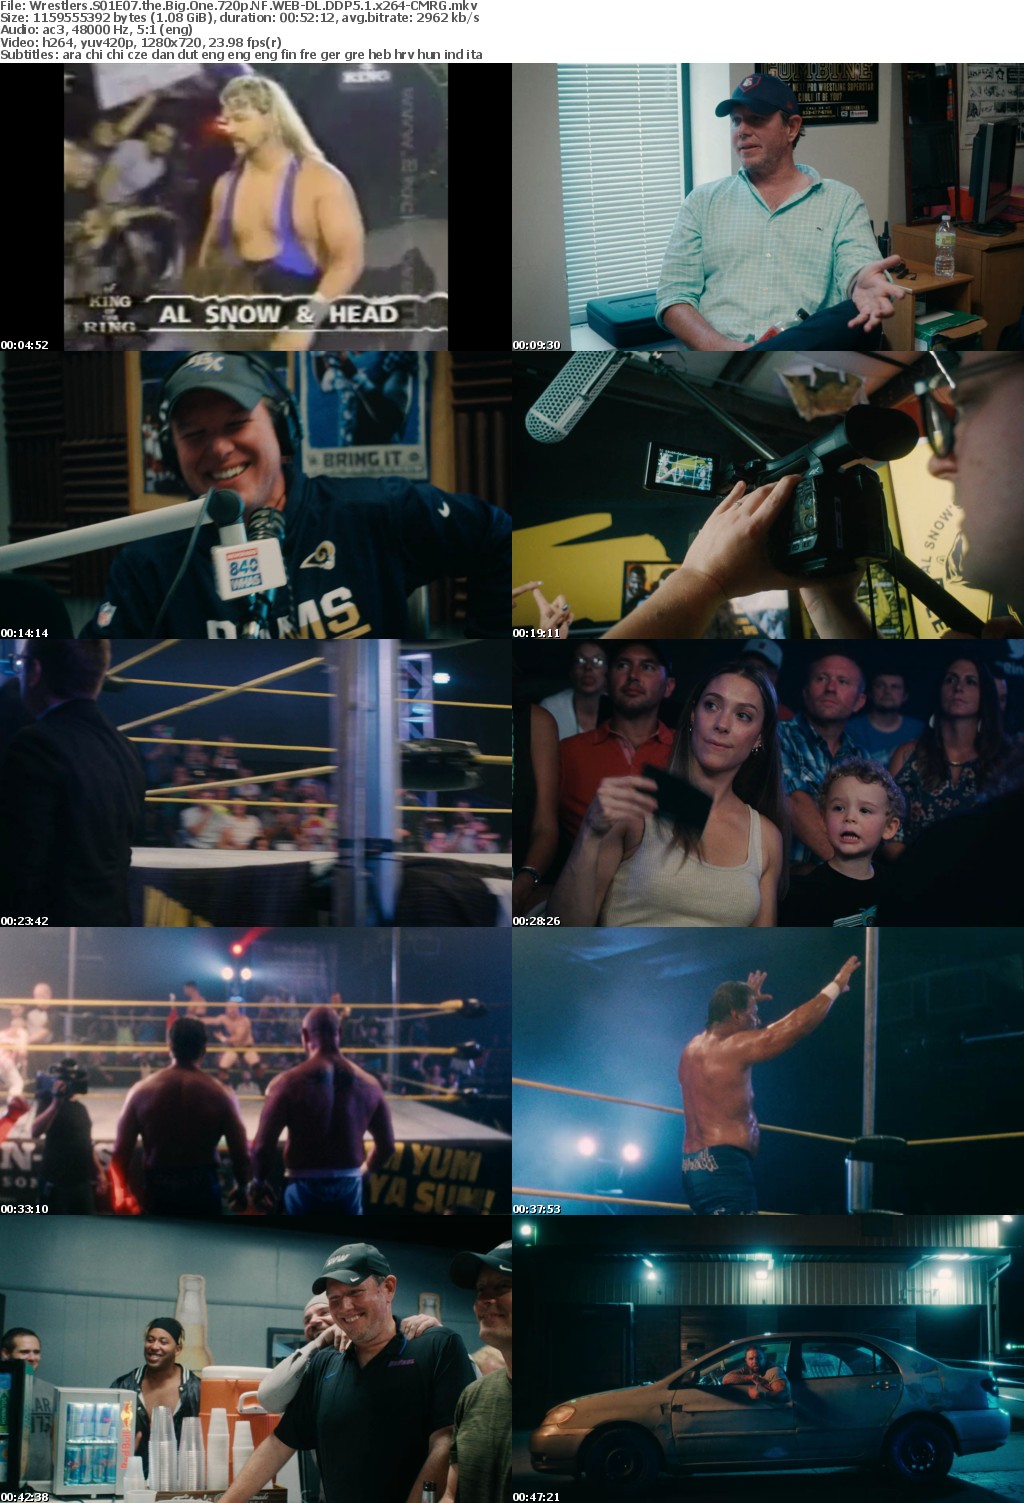 Wrestlers S01E07 the Big One 720p NF WEB-DL DDP5 1 x264-CMRG